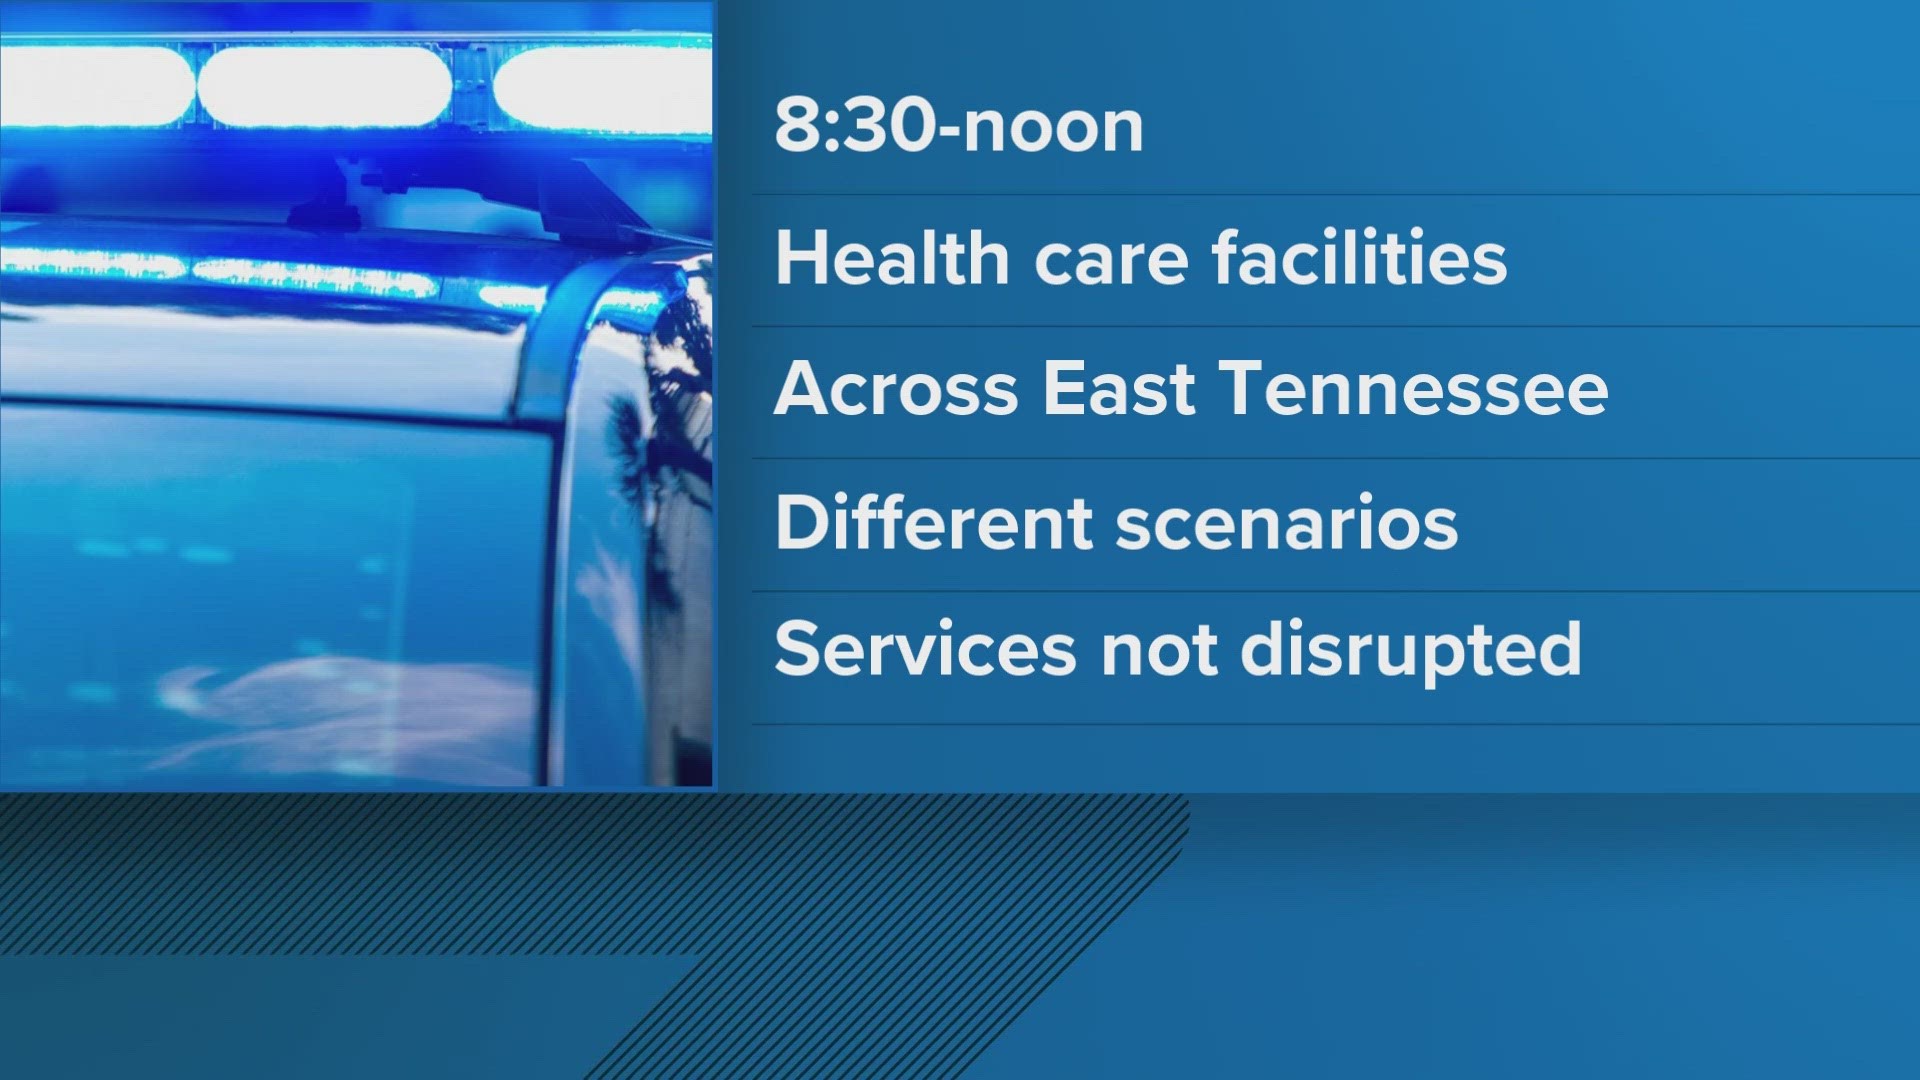 Hospitals, long-term care and assisted living centers, doctor's offices and other health care providers in East Tennessee will take part in the training.